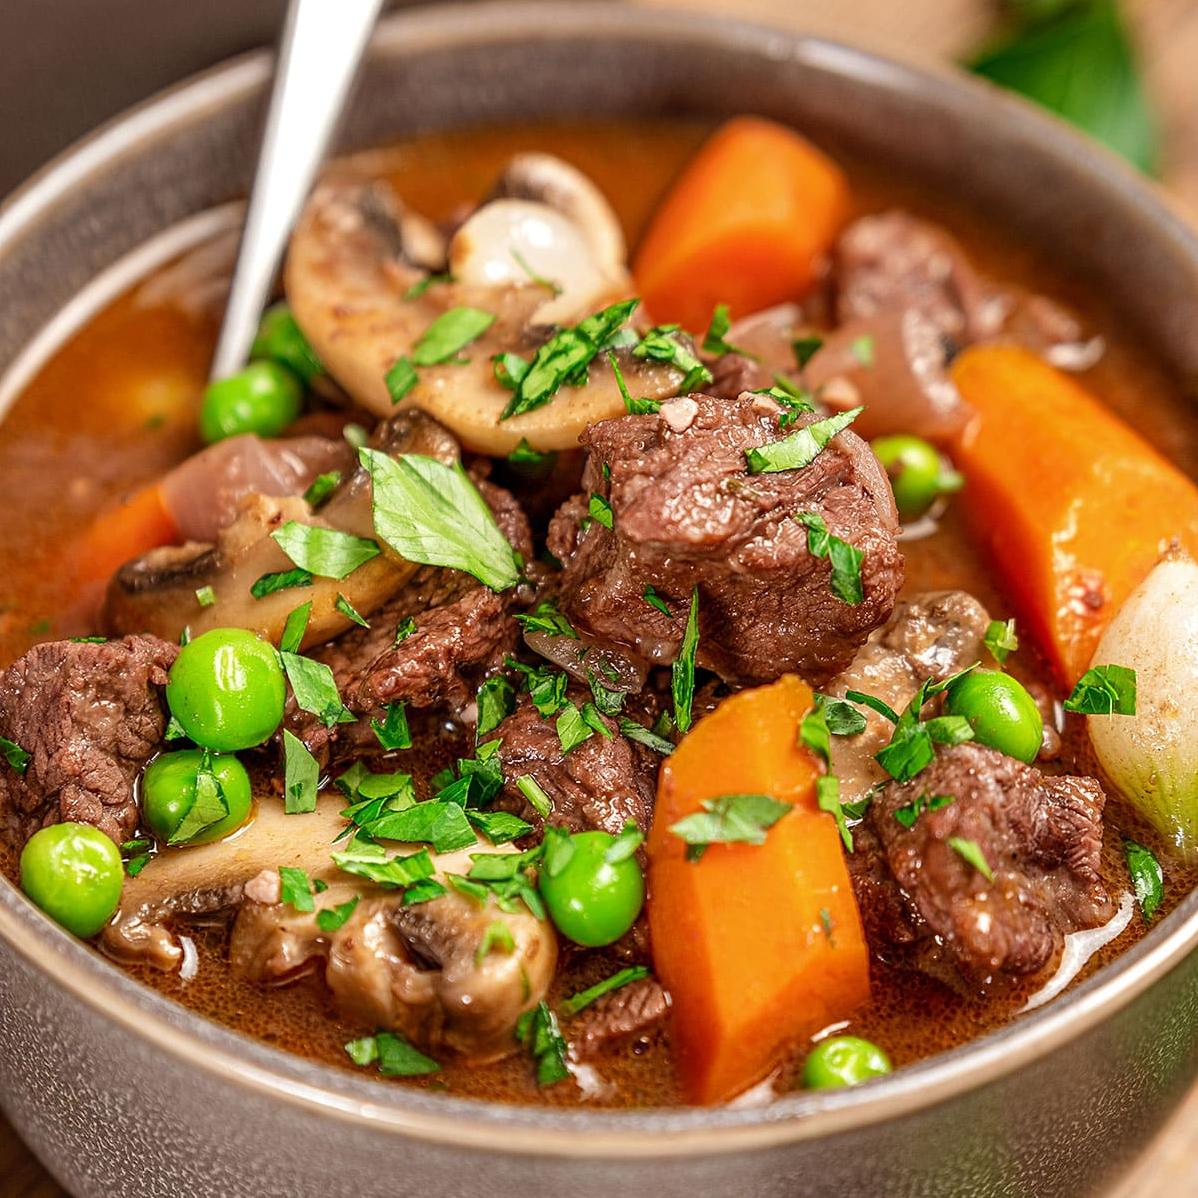  The aroma of simmering beef and red wine will make your mouth water.